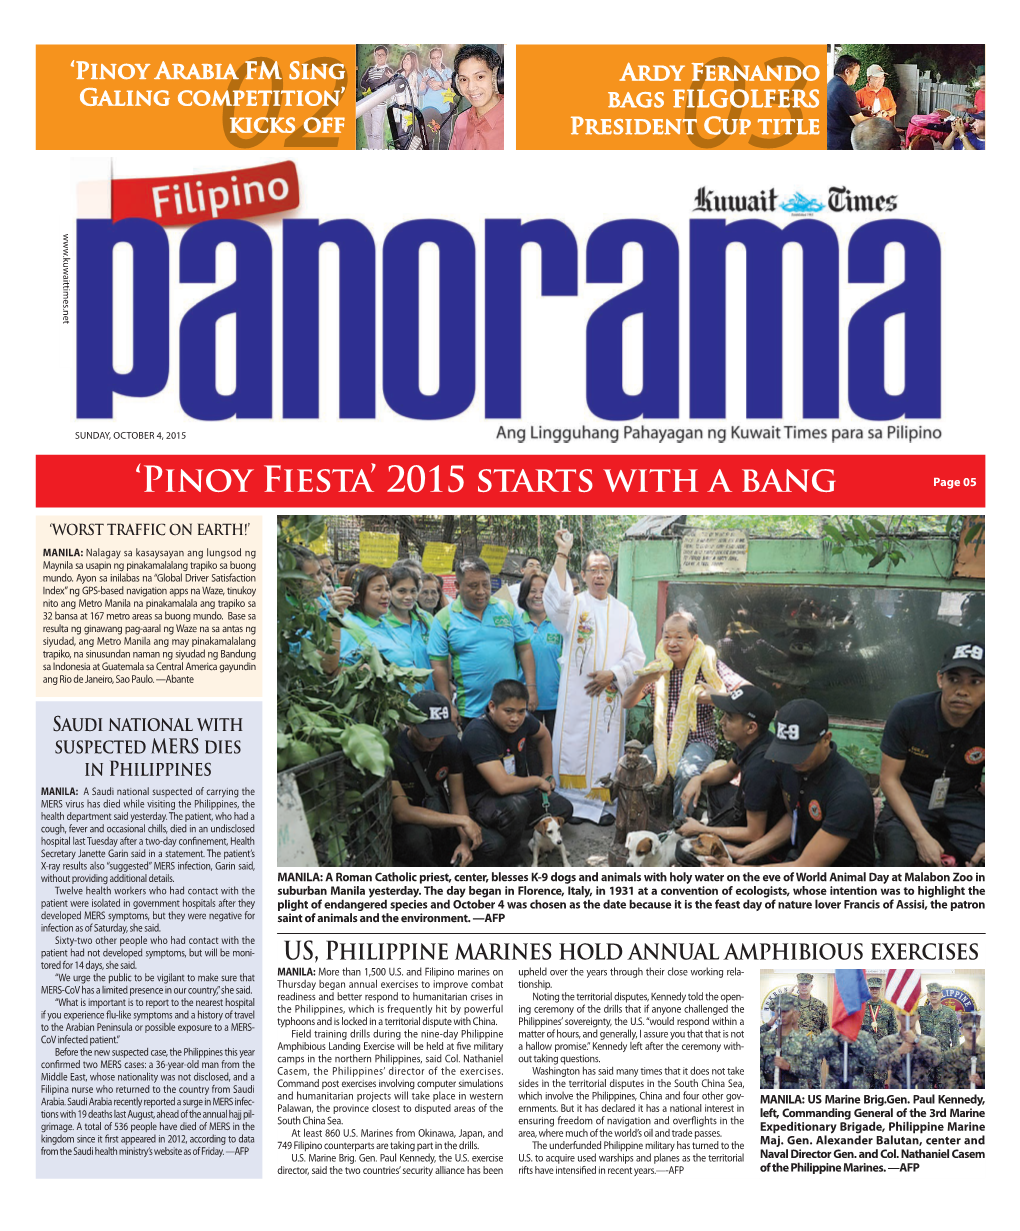 Pinoy Fiesta’ 2015 Starts with a Bang Page 05